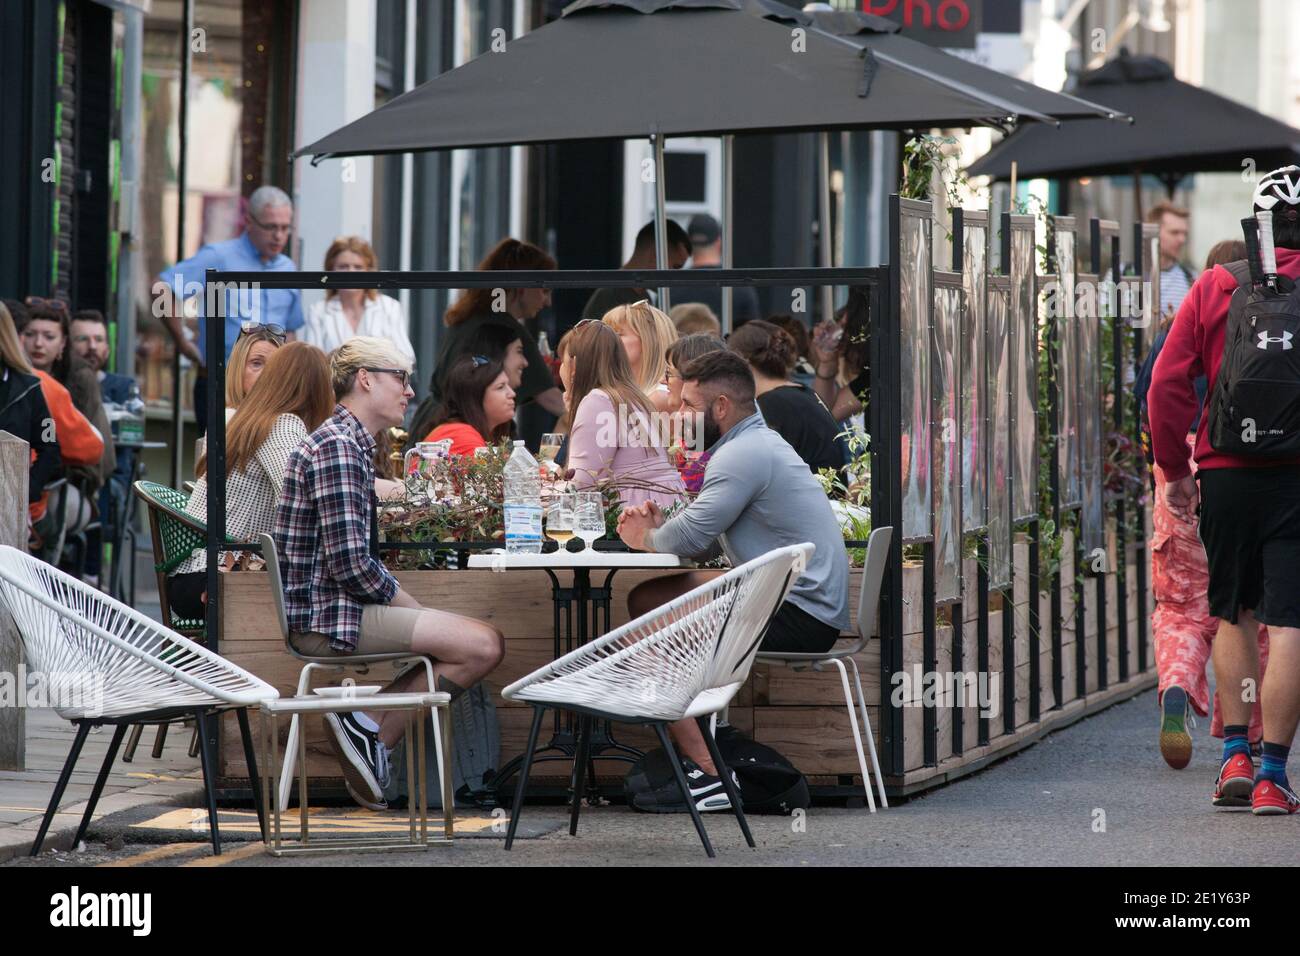 Liverpool, UK - September 19 2020: People eat outside in Liverpool city centre before local lockdown restrictions come into effect on Tuesday. Stock Photo